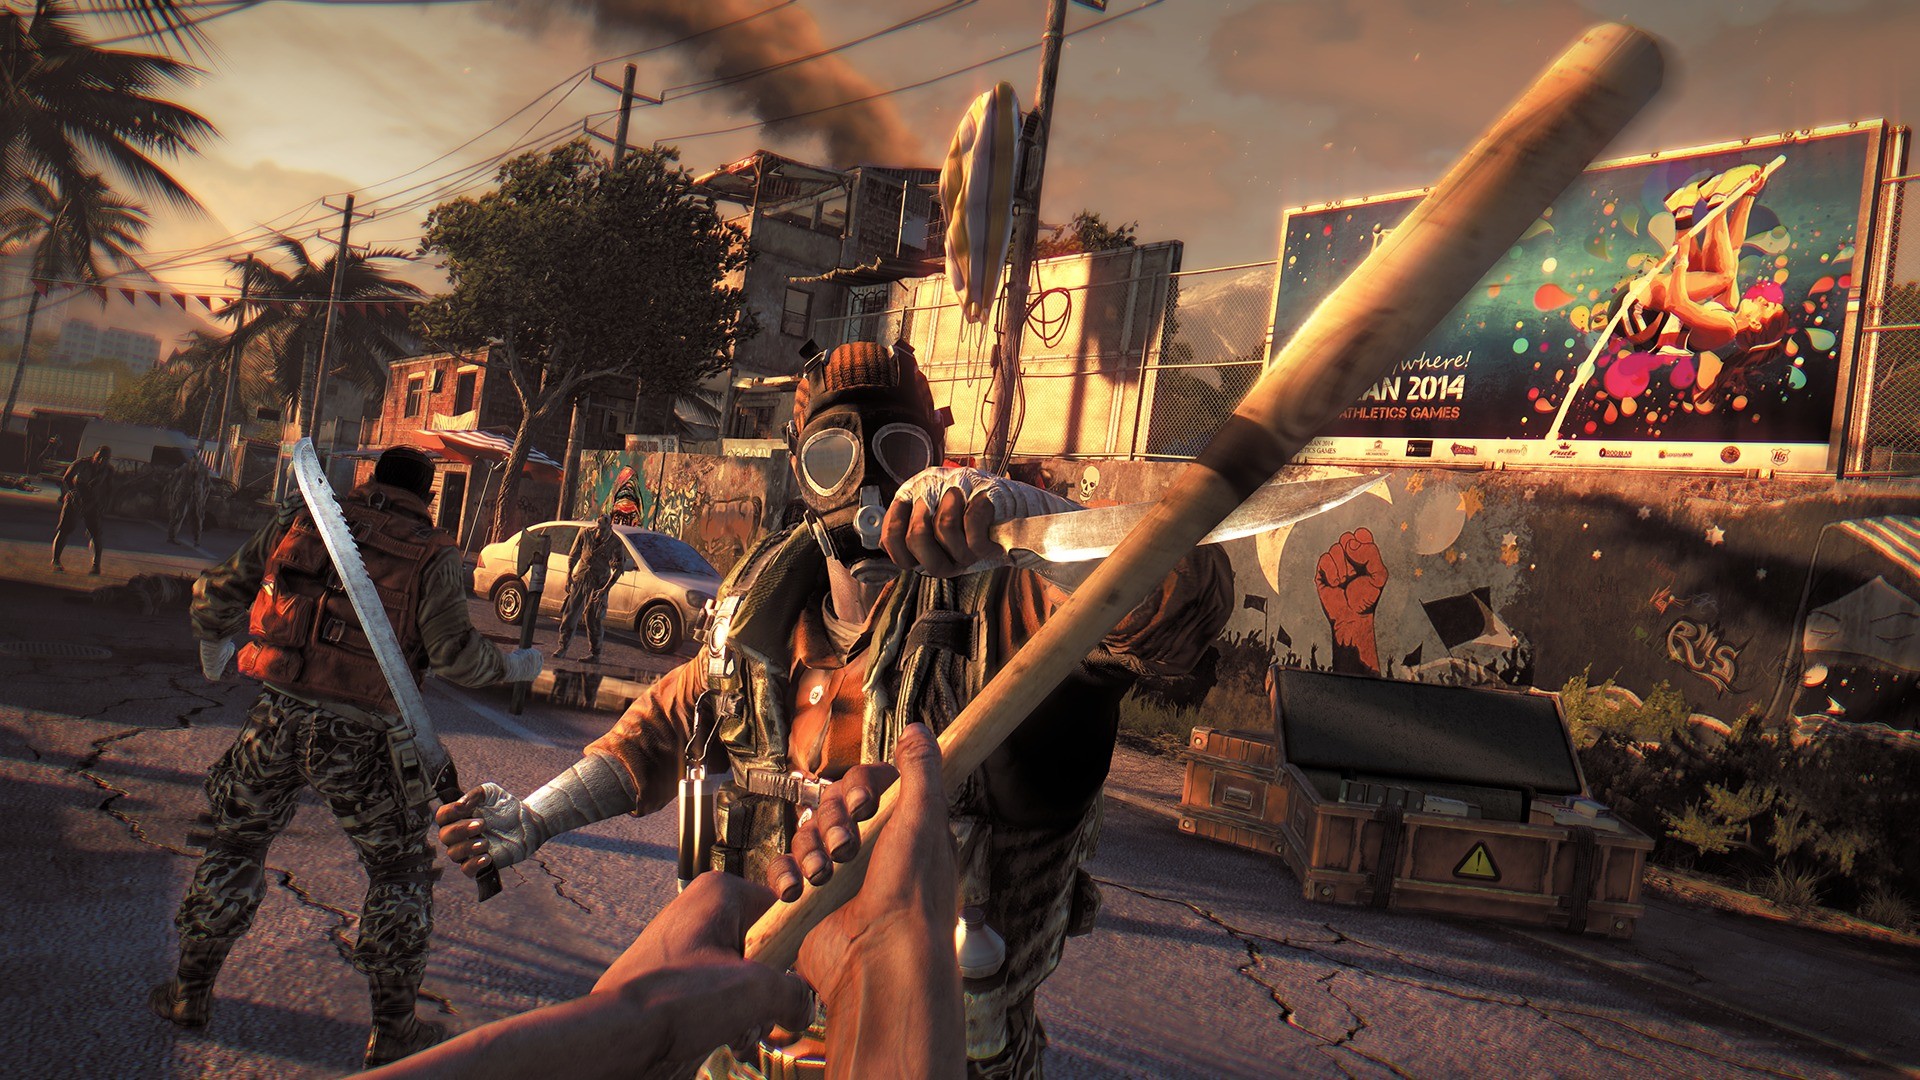 Dying Light: The Following - Enhanced Edition - Dying Light EE